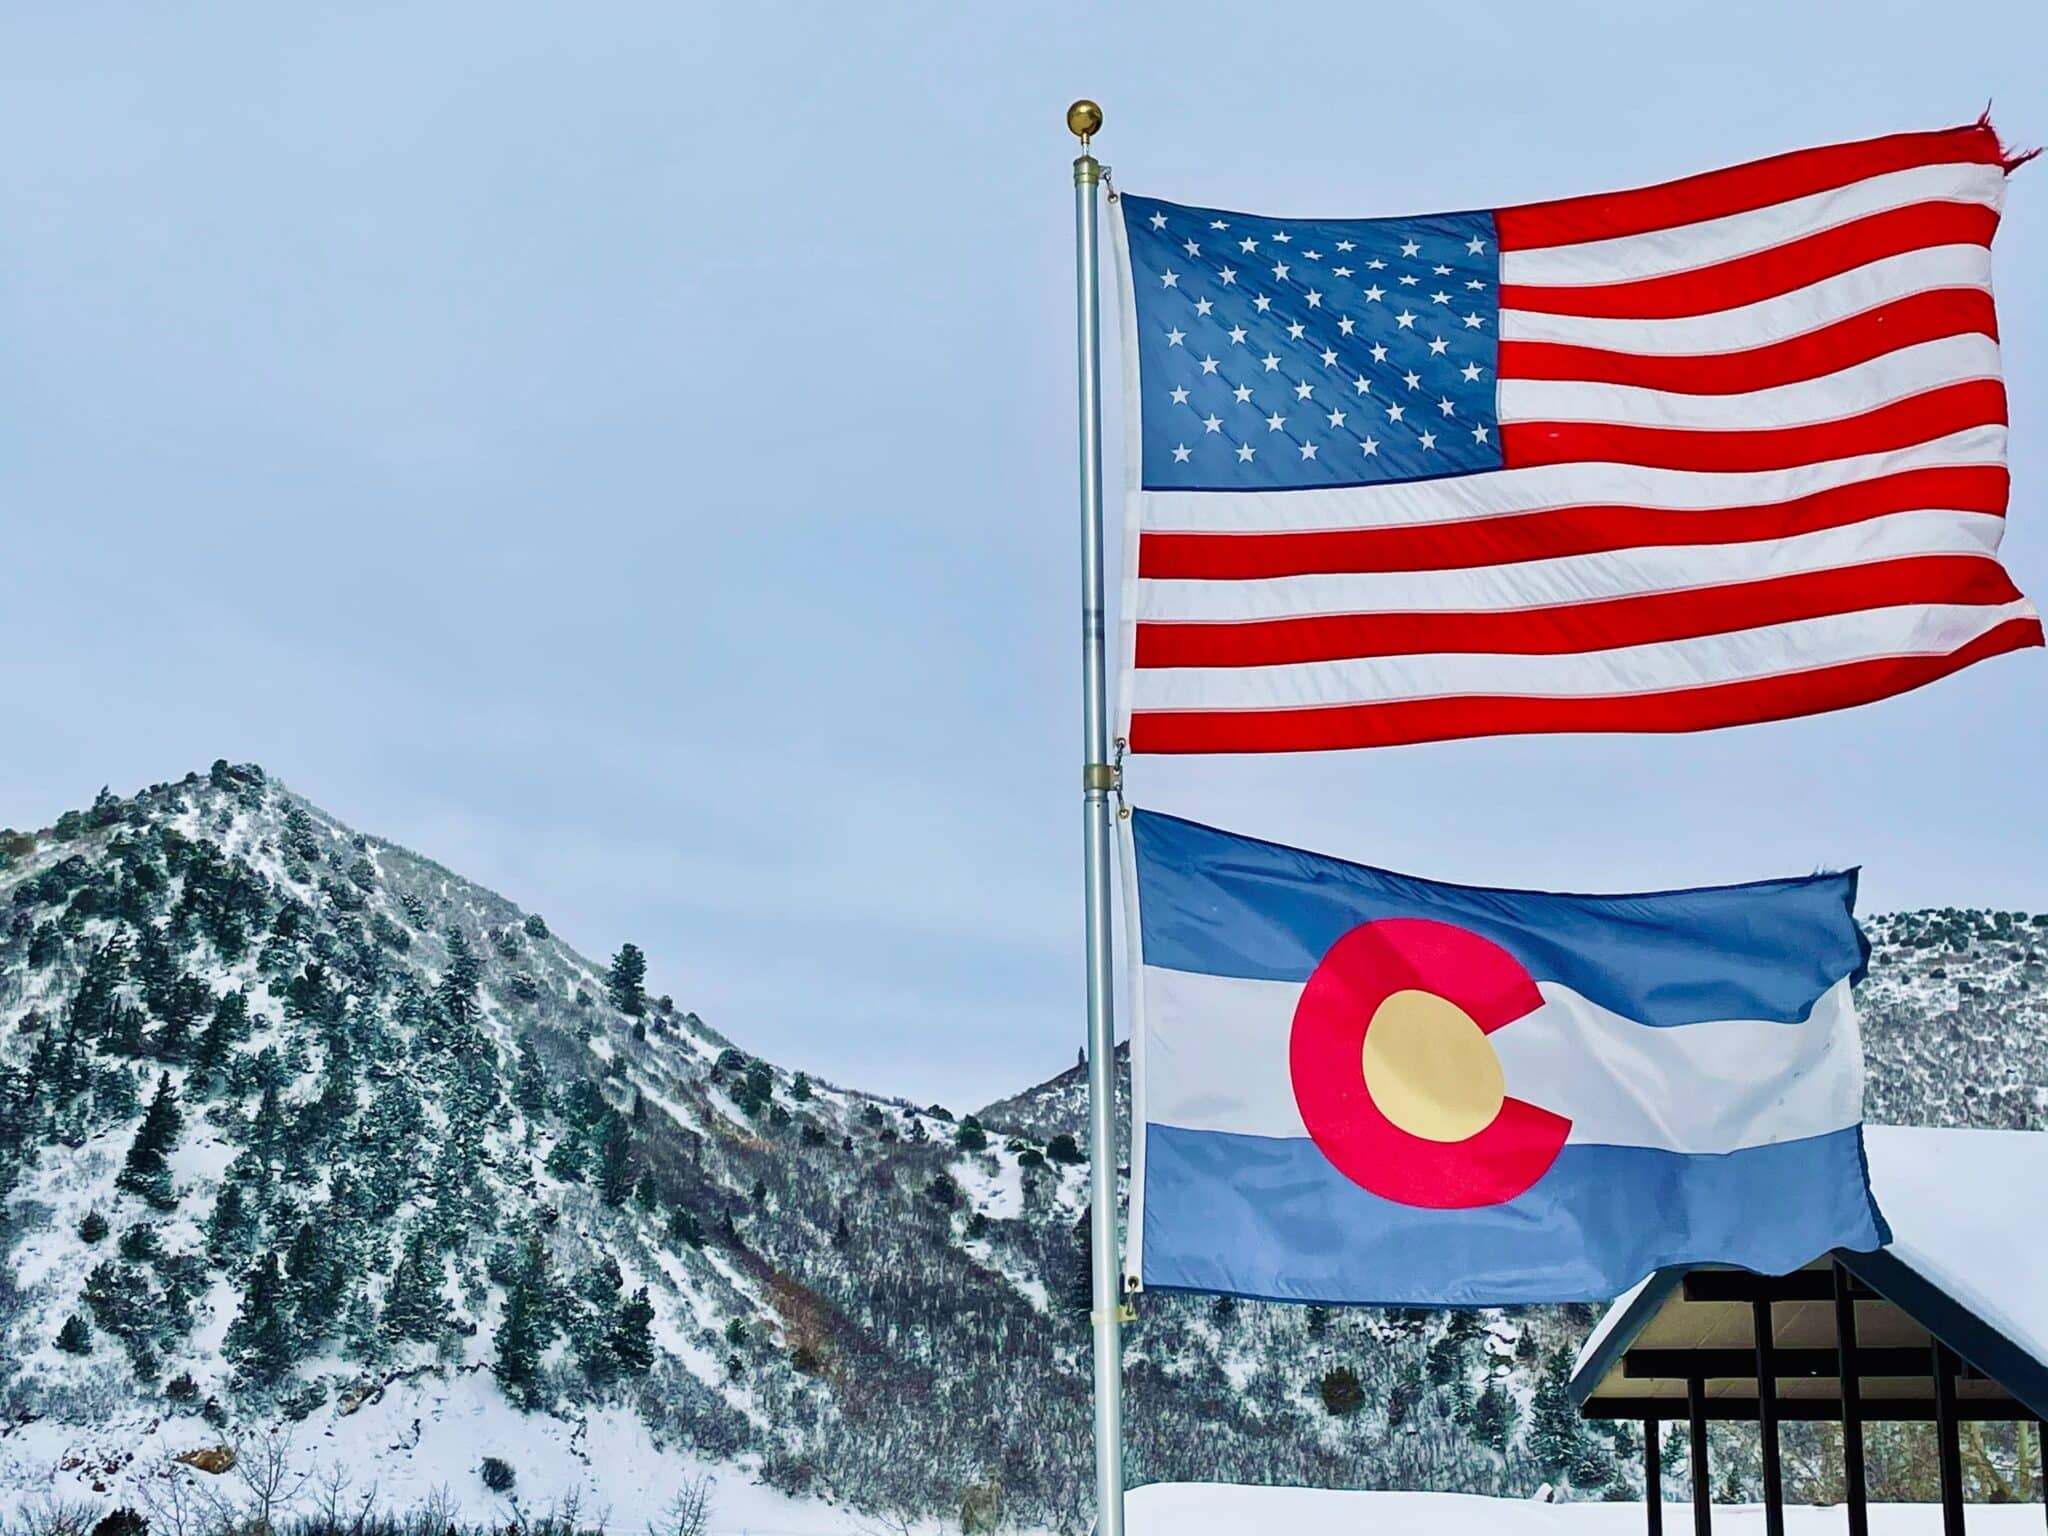 Colorado State Flag waving beneath a US frag with colorado snow-capped mountains in the background.